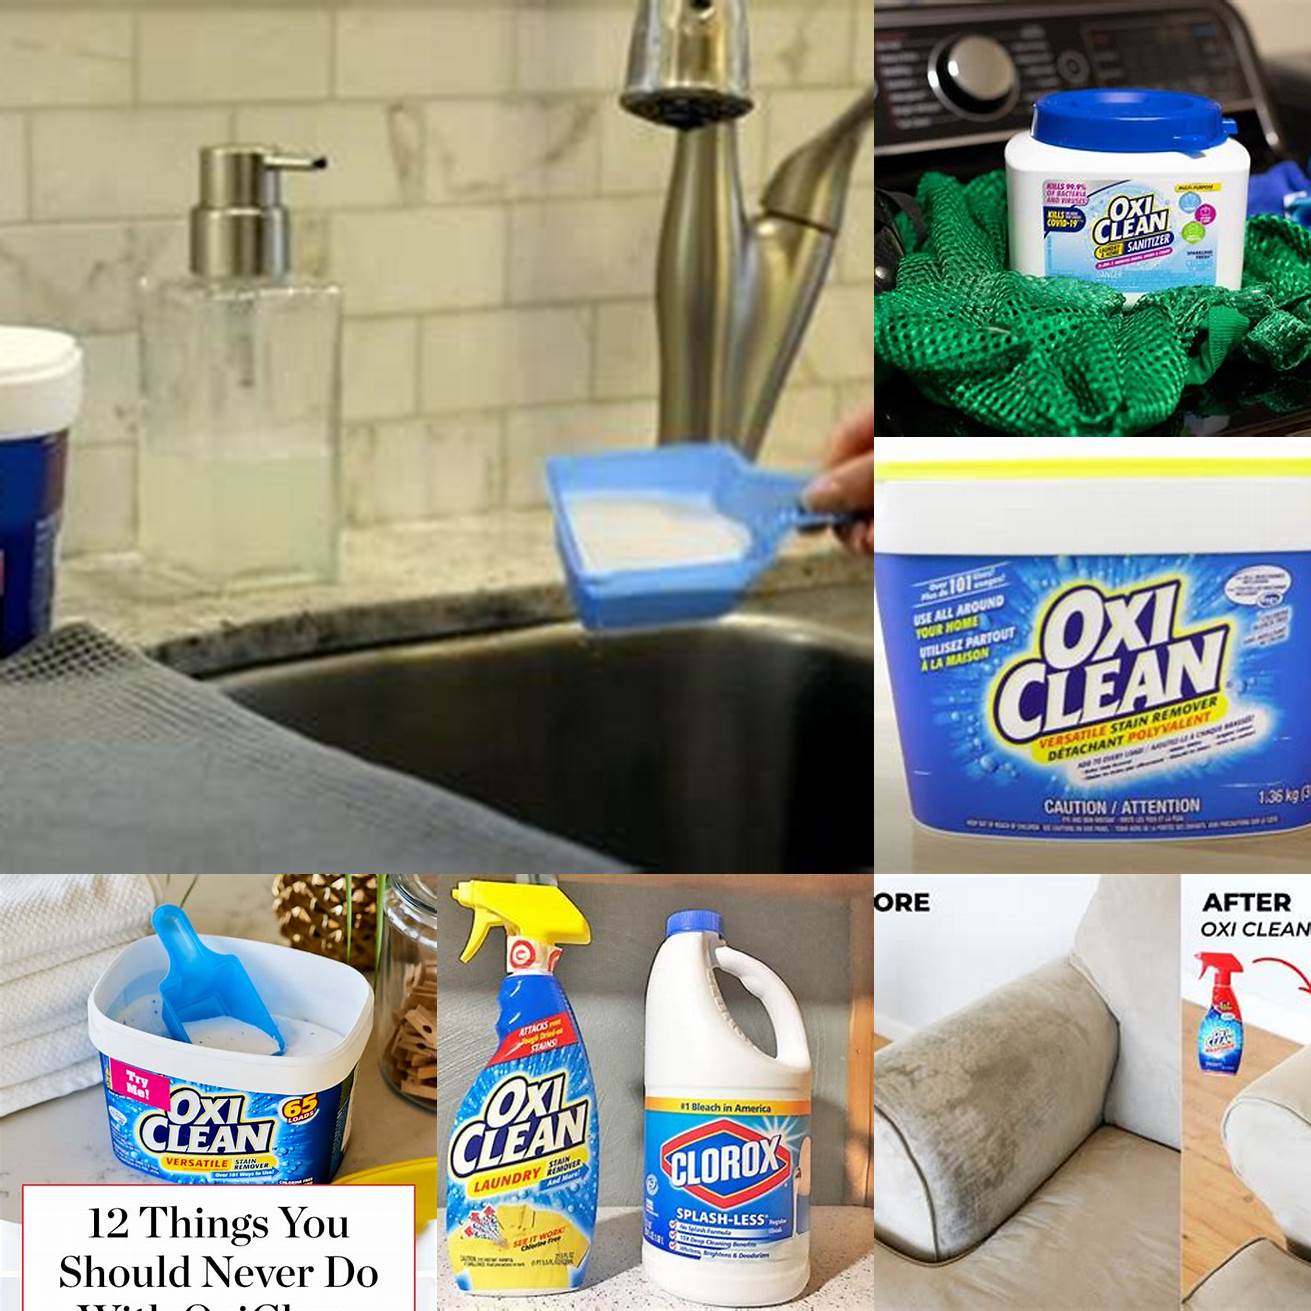 Mixing the OxiClean Solution